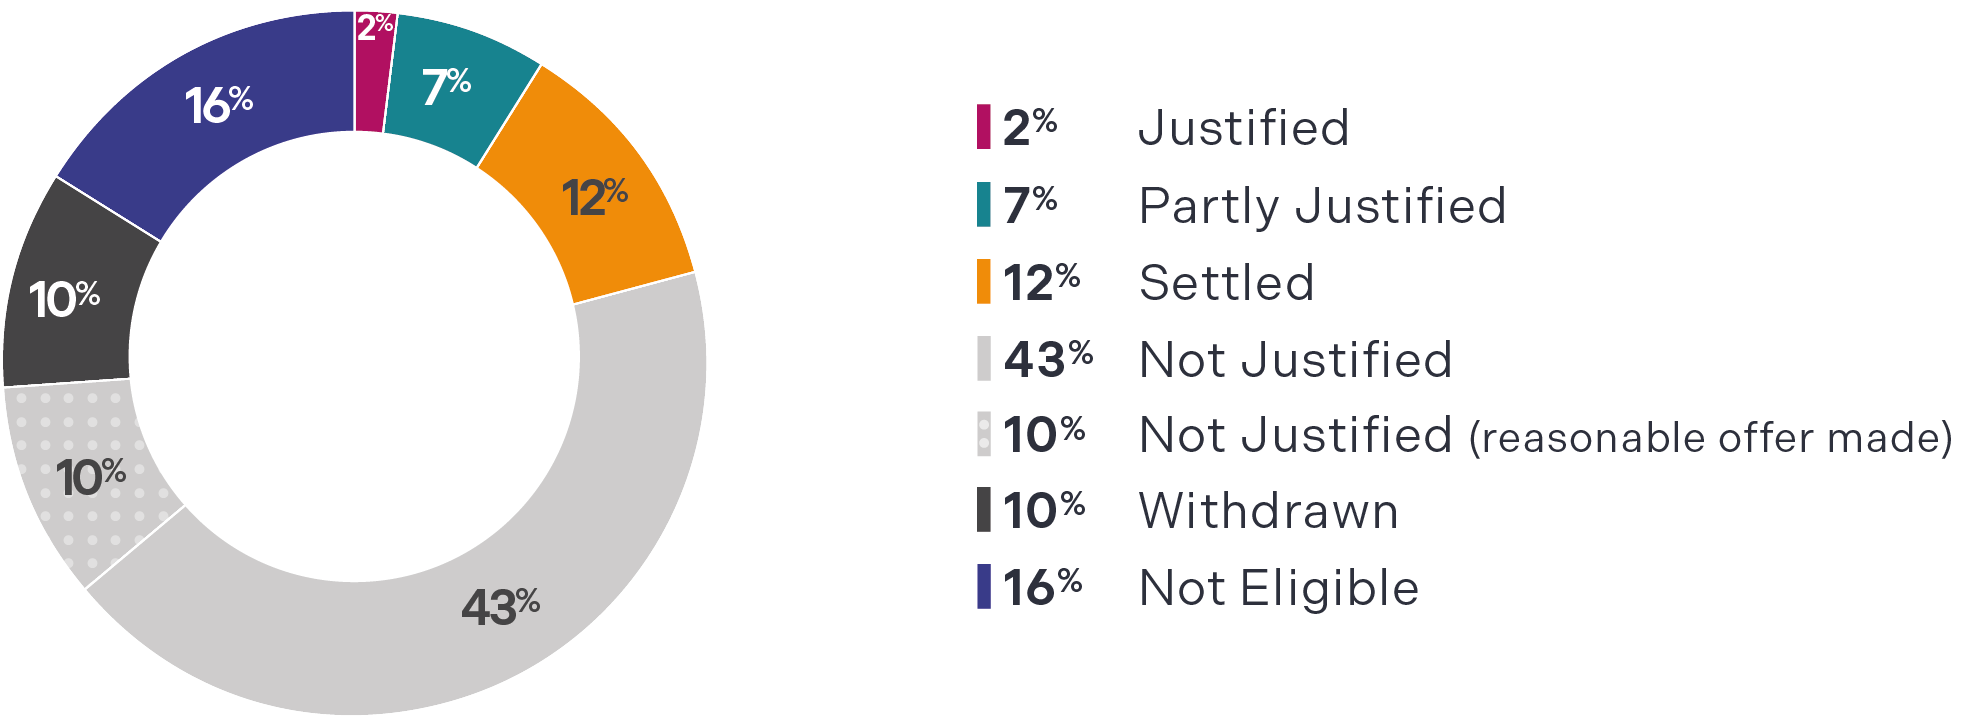 Pie chart showing the percentages of the outcome of complaints